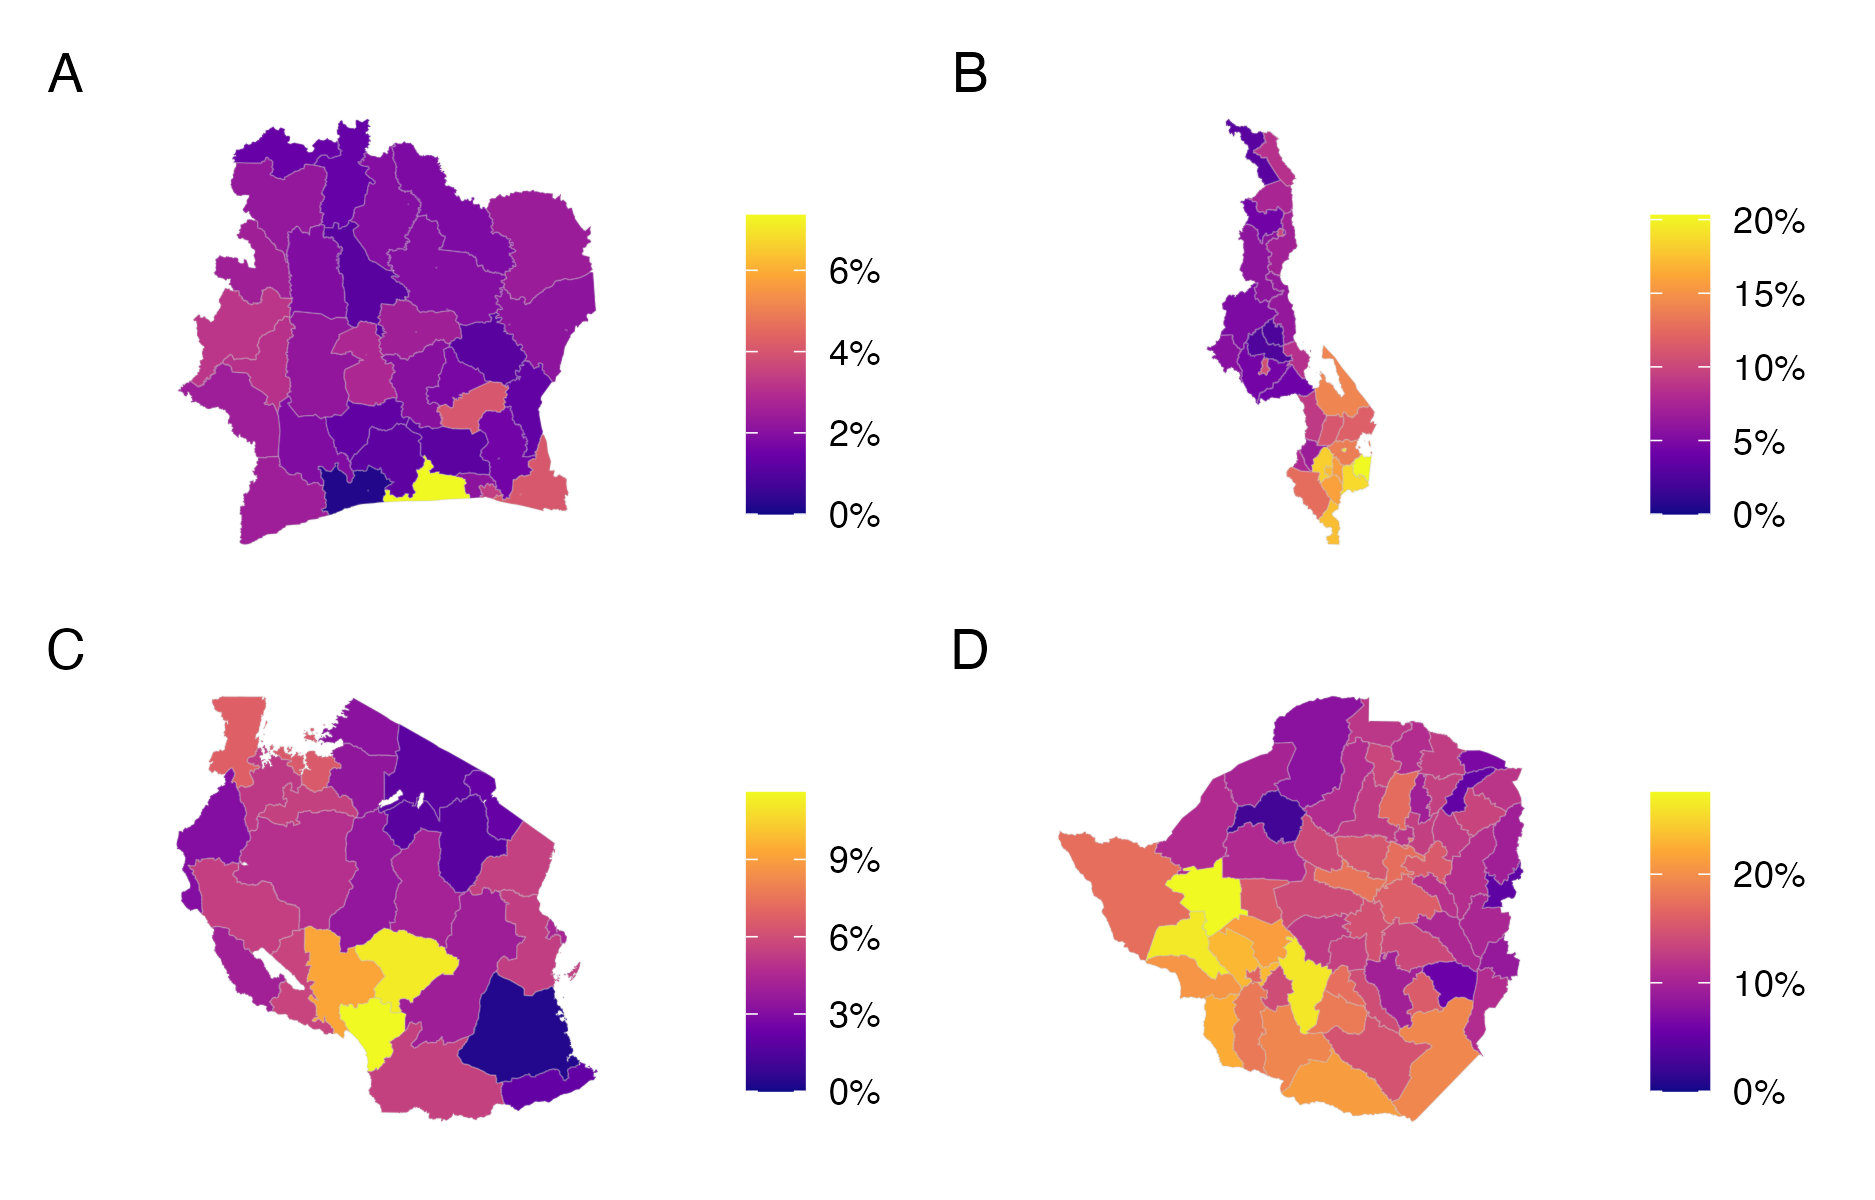 Adult (15-49) HIV prevalence from the most recent PHIA survey conducted in Côte d’Ivoire (Panel A), Malawi (Panel B), Tanzania (Panel C), and Zimbabwe (Panel D). These estimates are survey weighted according to Equation (4.18).